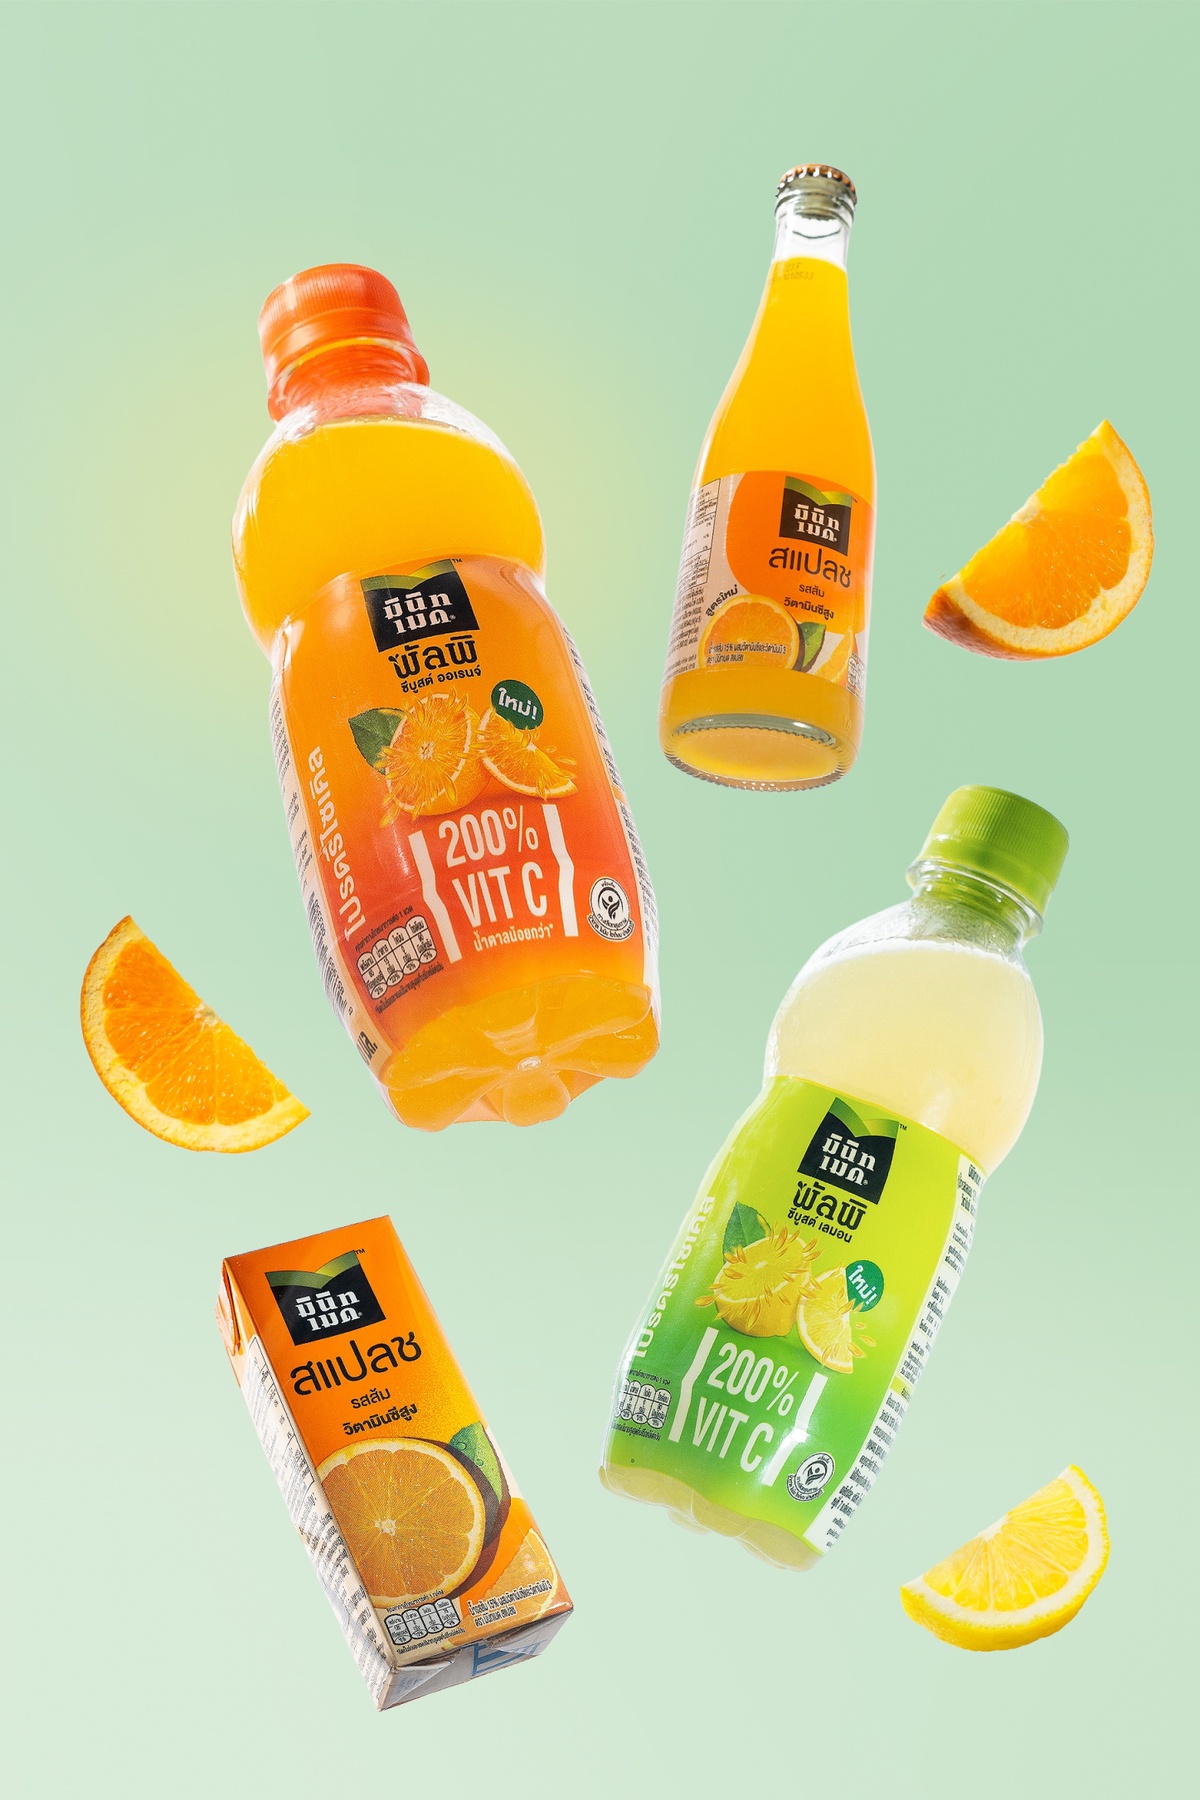 'Coca-Cola' forays into vitamin drinks market with new 'Minute Maid Pulpy' C-Boost, delighting juice lovers with 200% more vitamin C and real fruit pulp